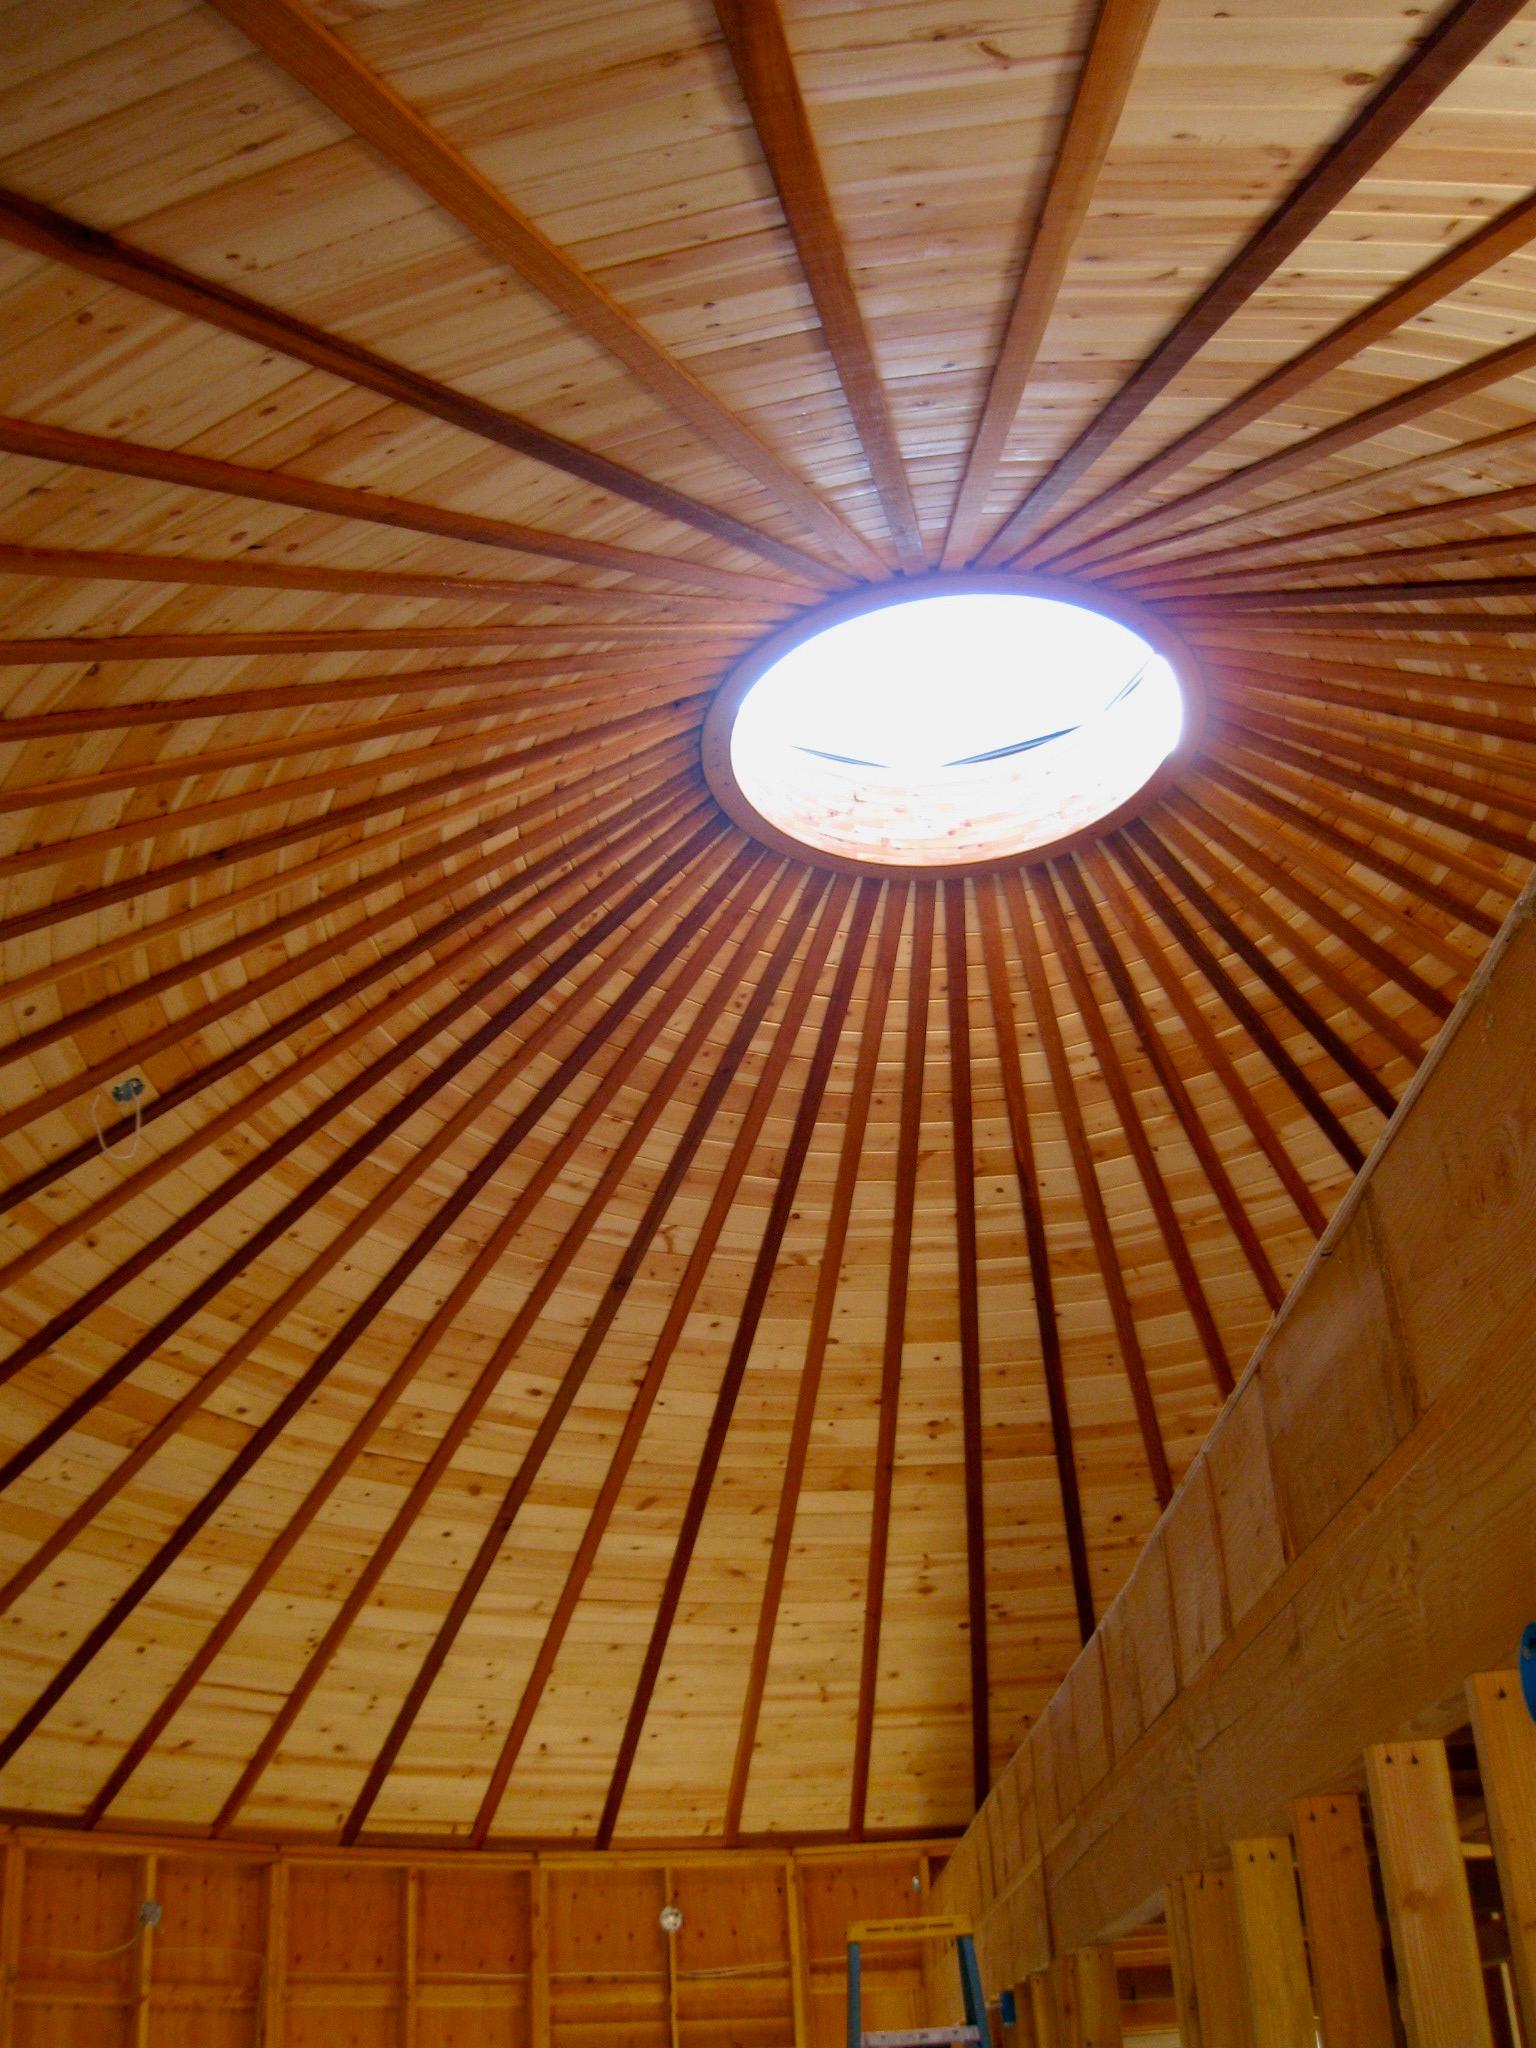 Ceiling of a Smiling Woods Wooden yurt